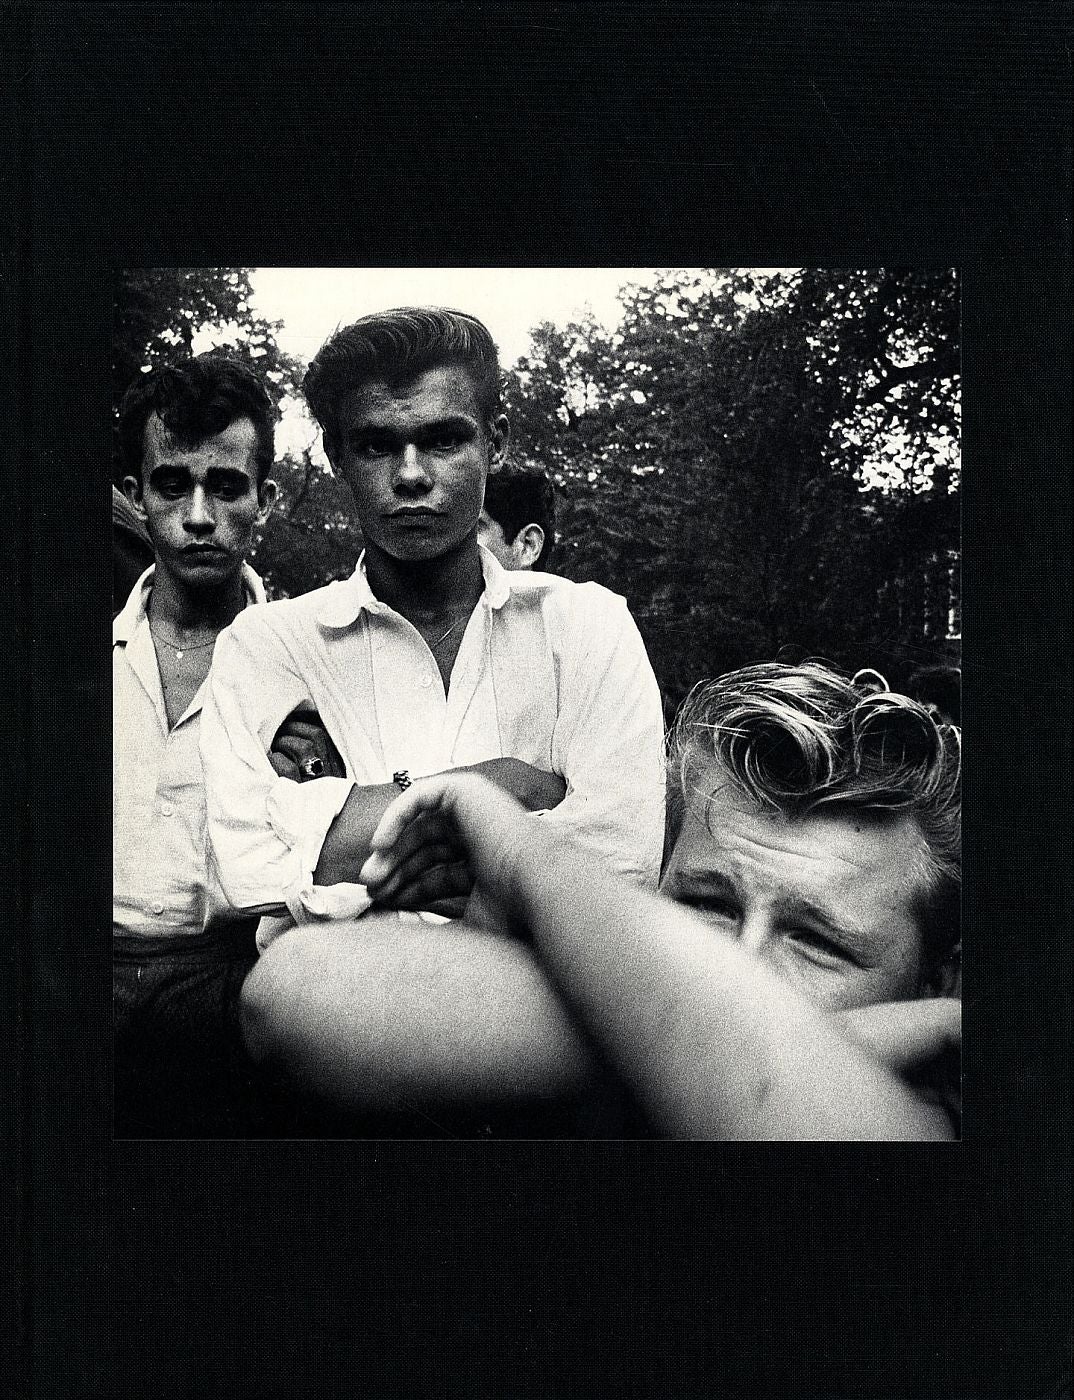 The Age of Adolescence: Joseph Sterling Photographs 1959-1964